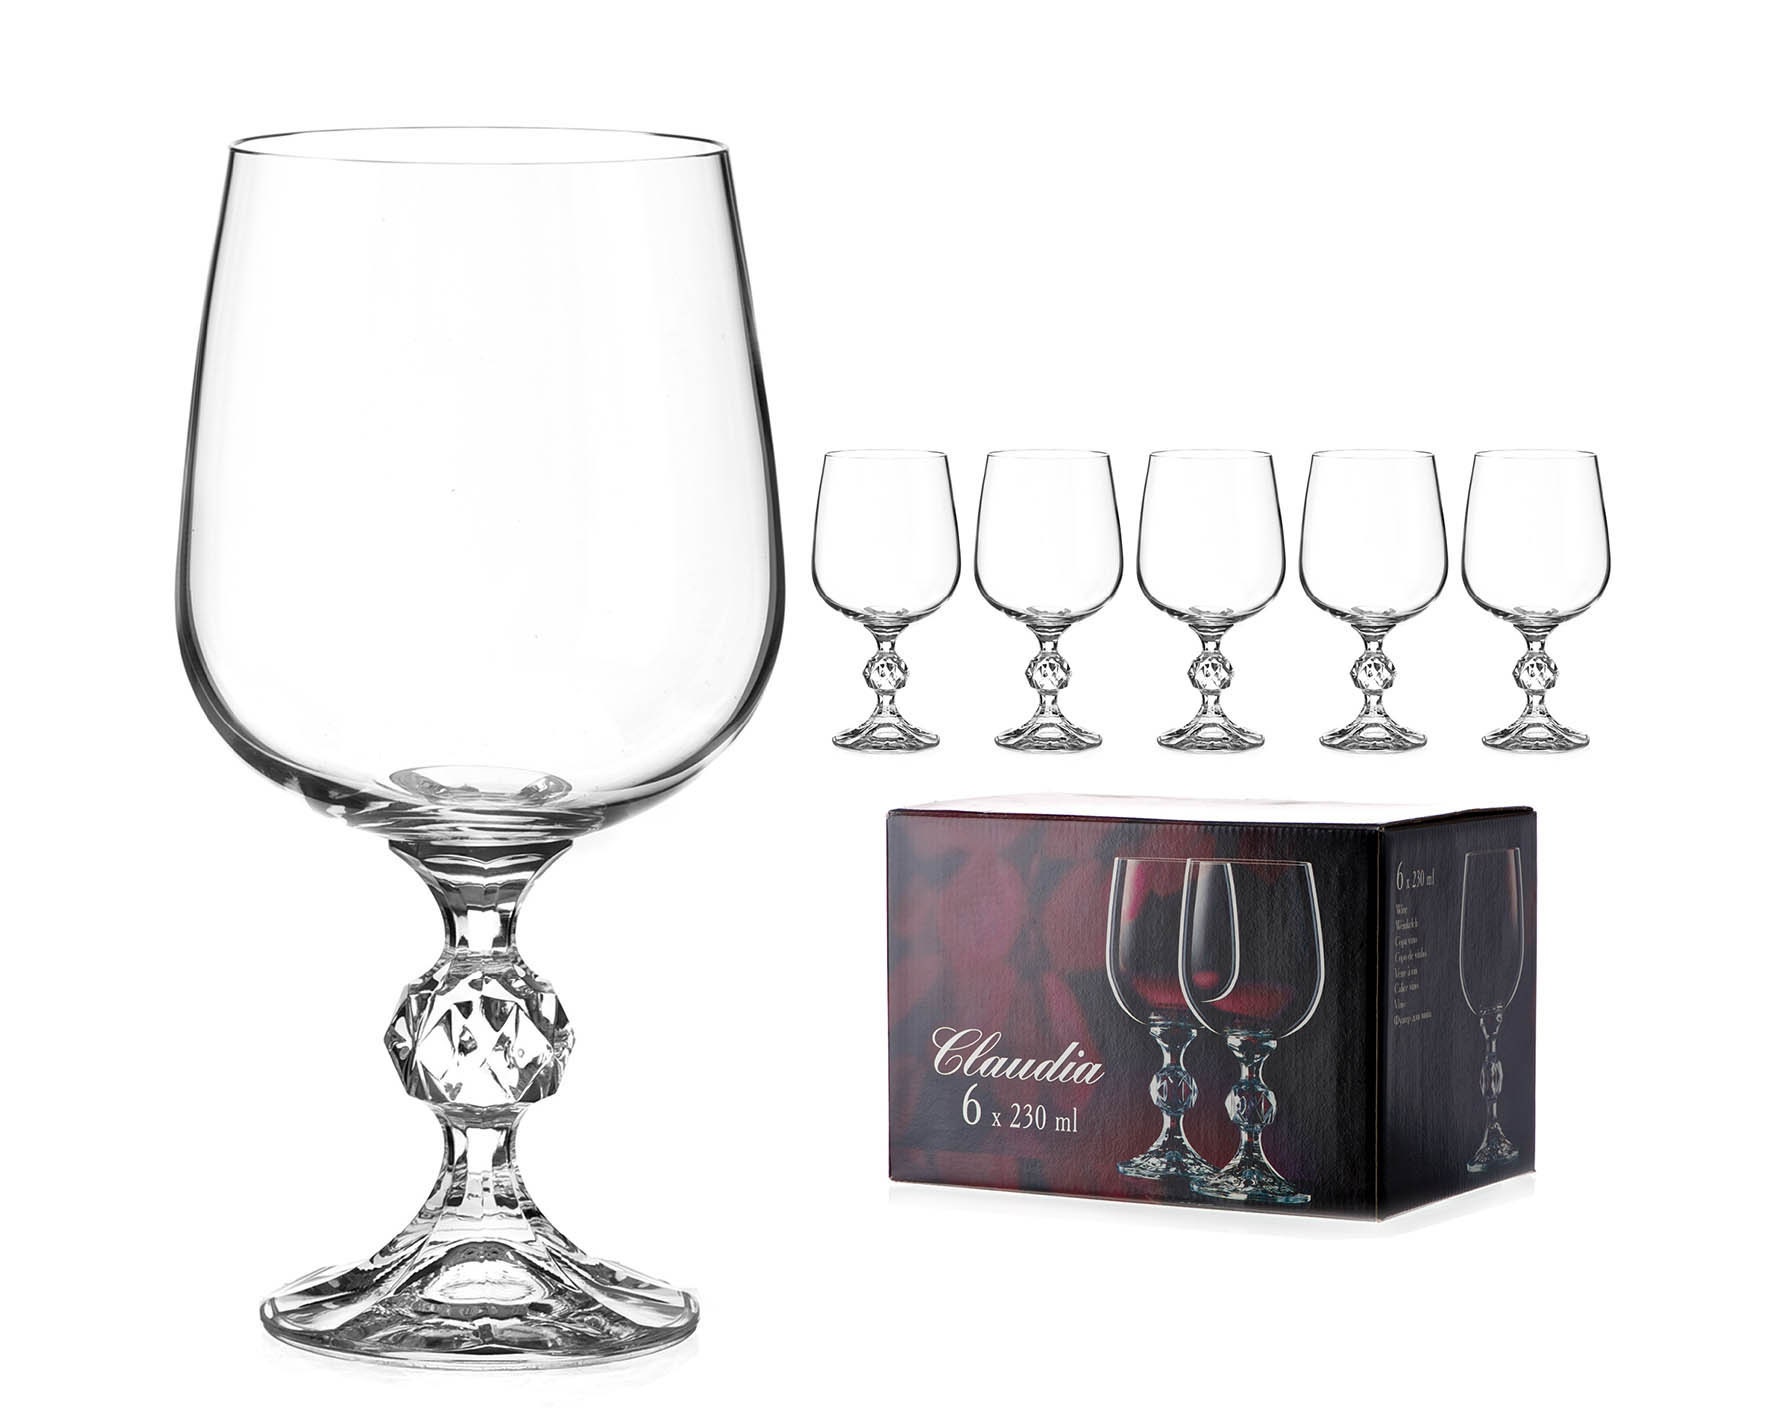 Luxbe Crystal Wine Glasses 20.5-ounce, Set Of 4